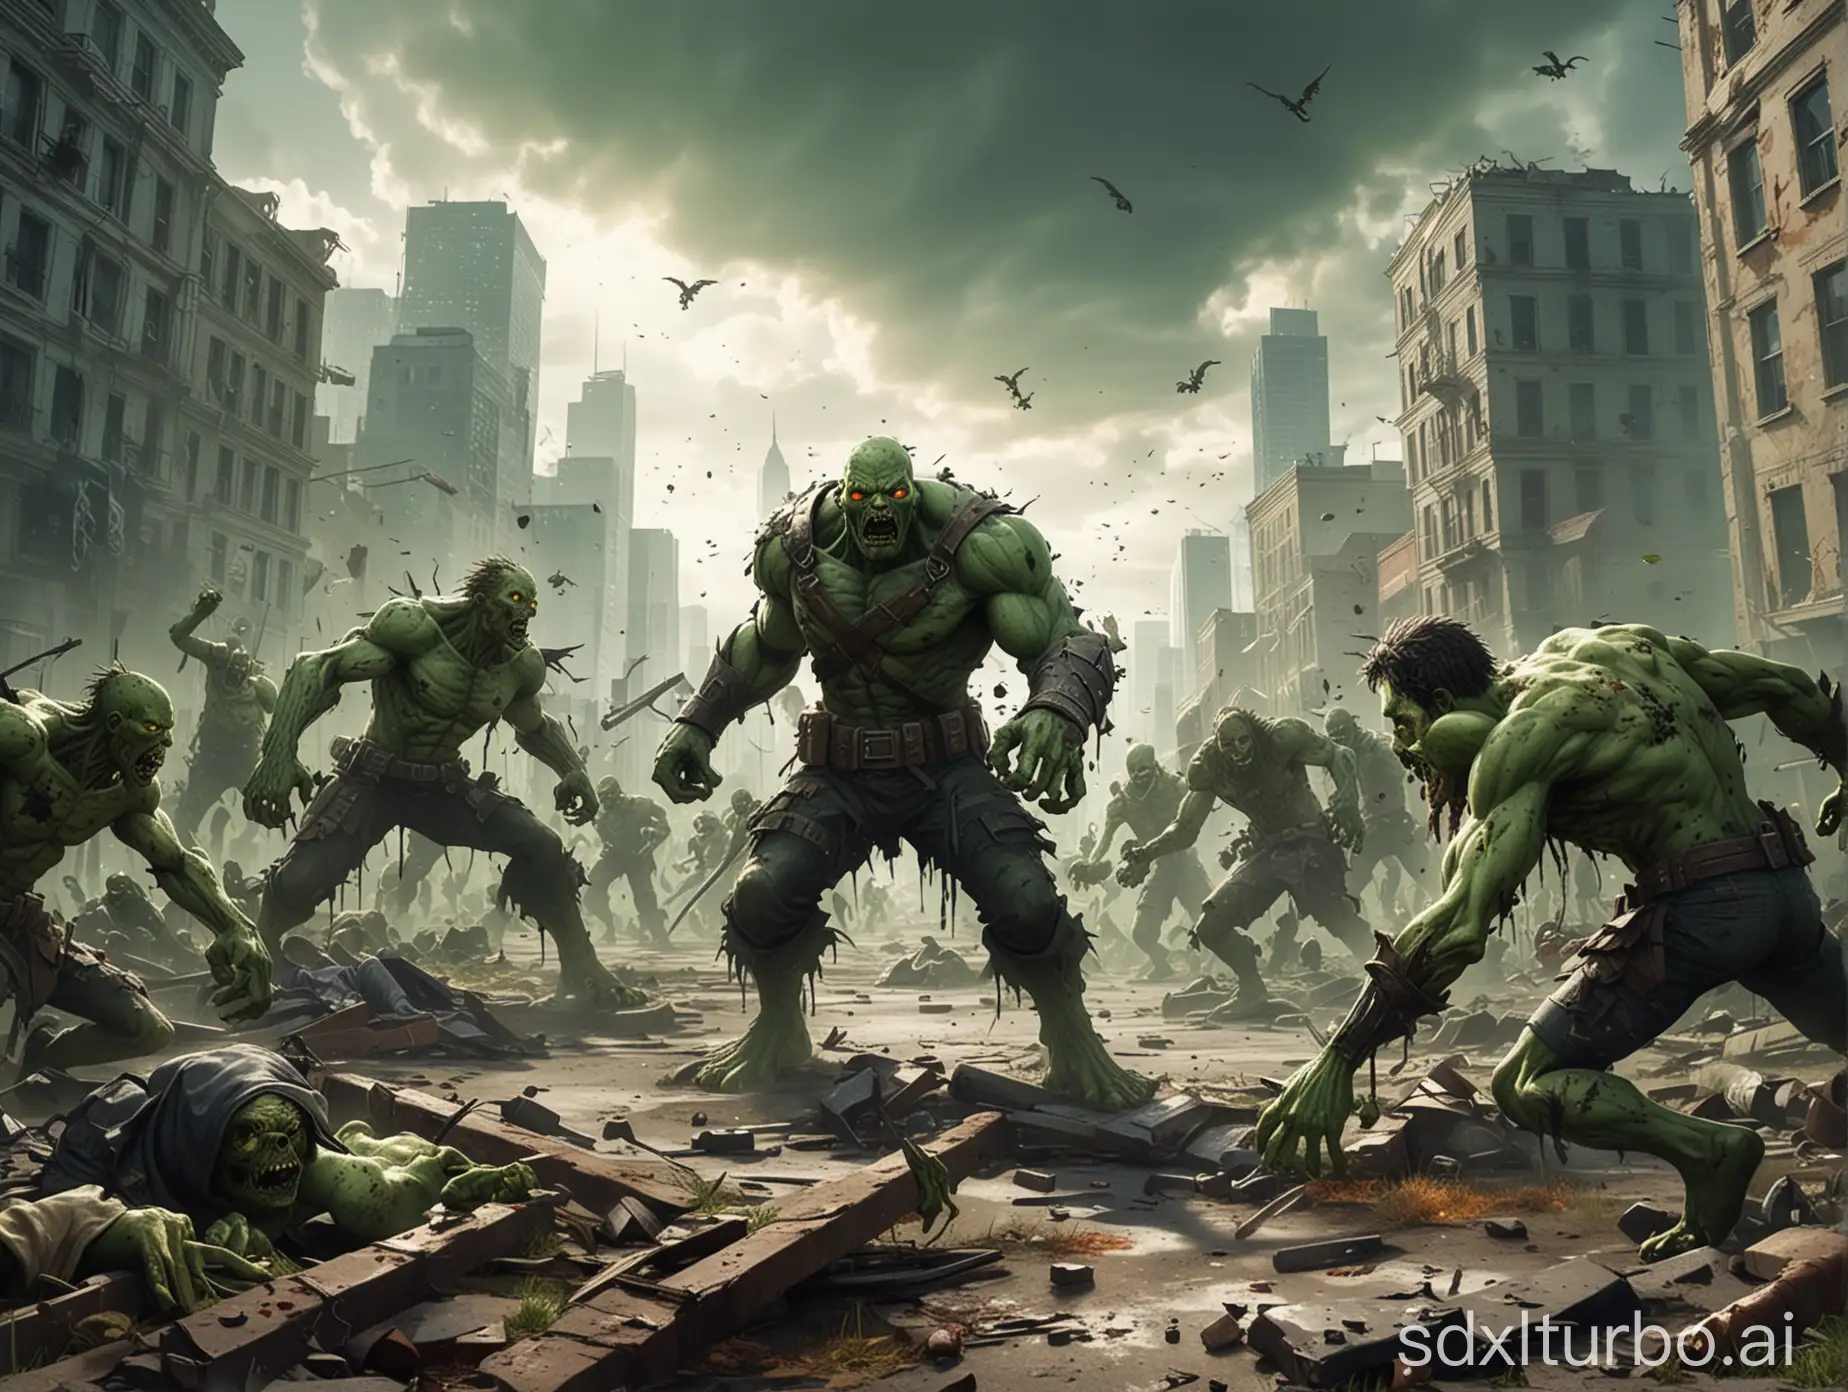 cartoon characters fighting green zombies scene, god's perspective, casual painting style, with city battlefield atmosphere